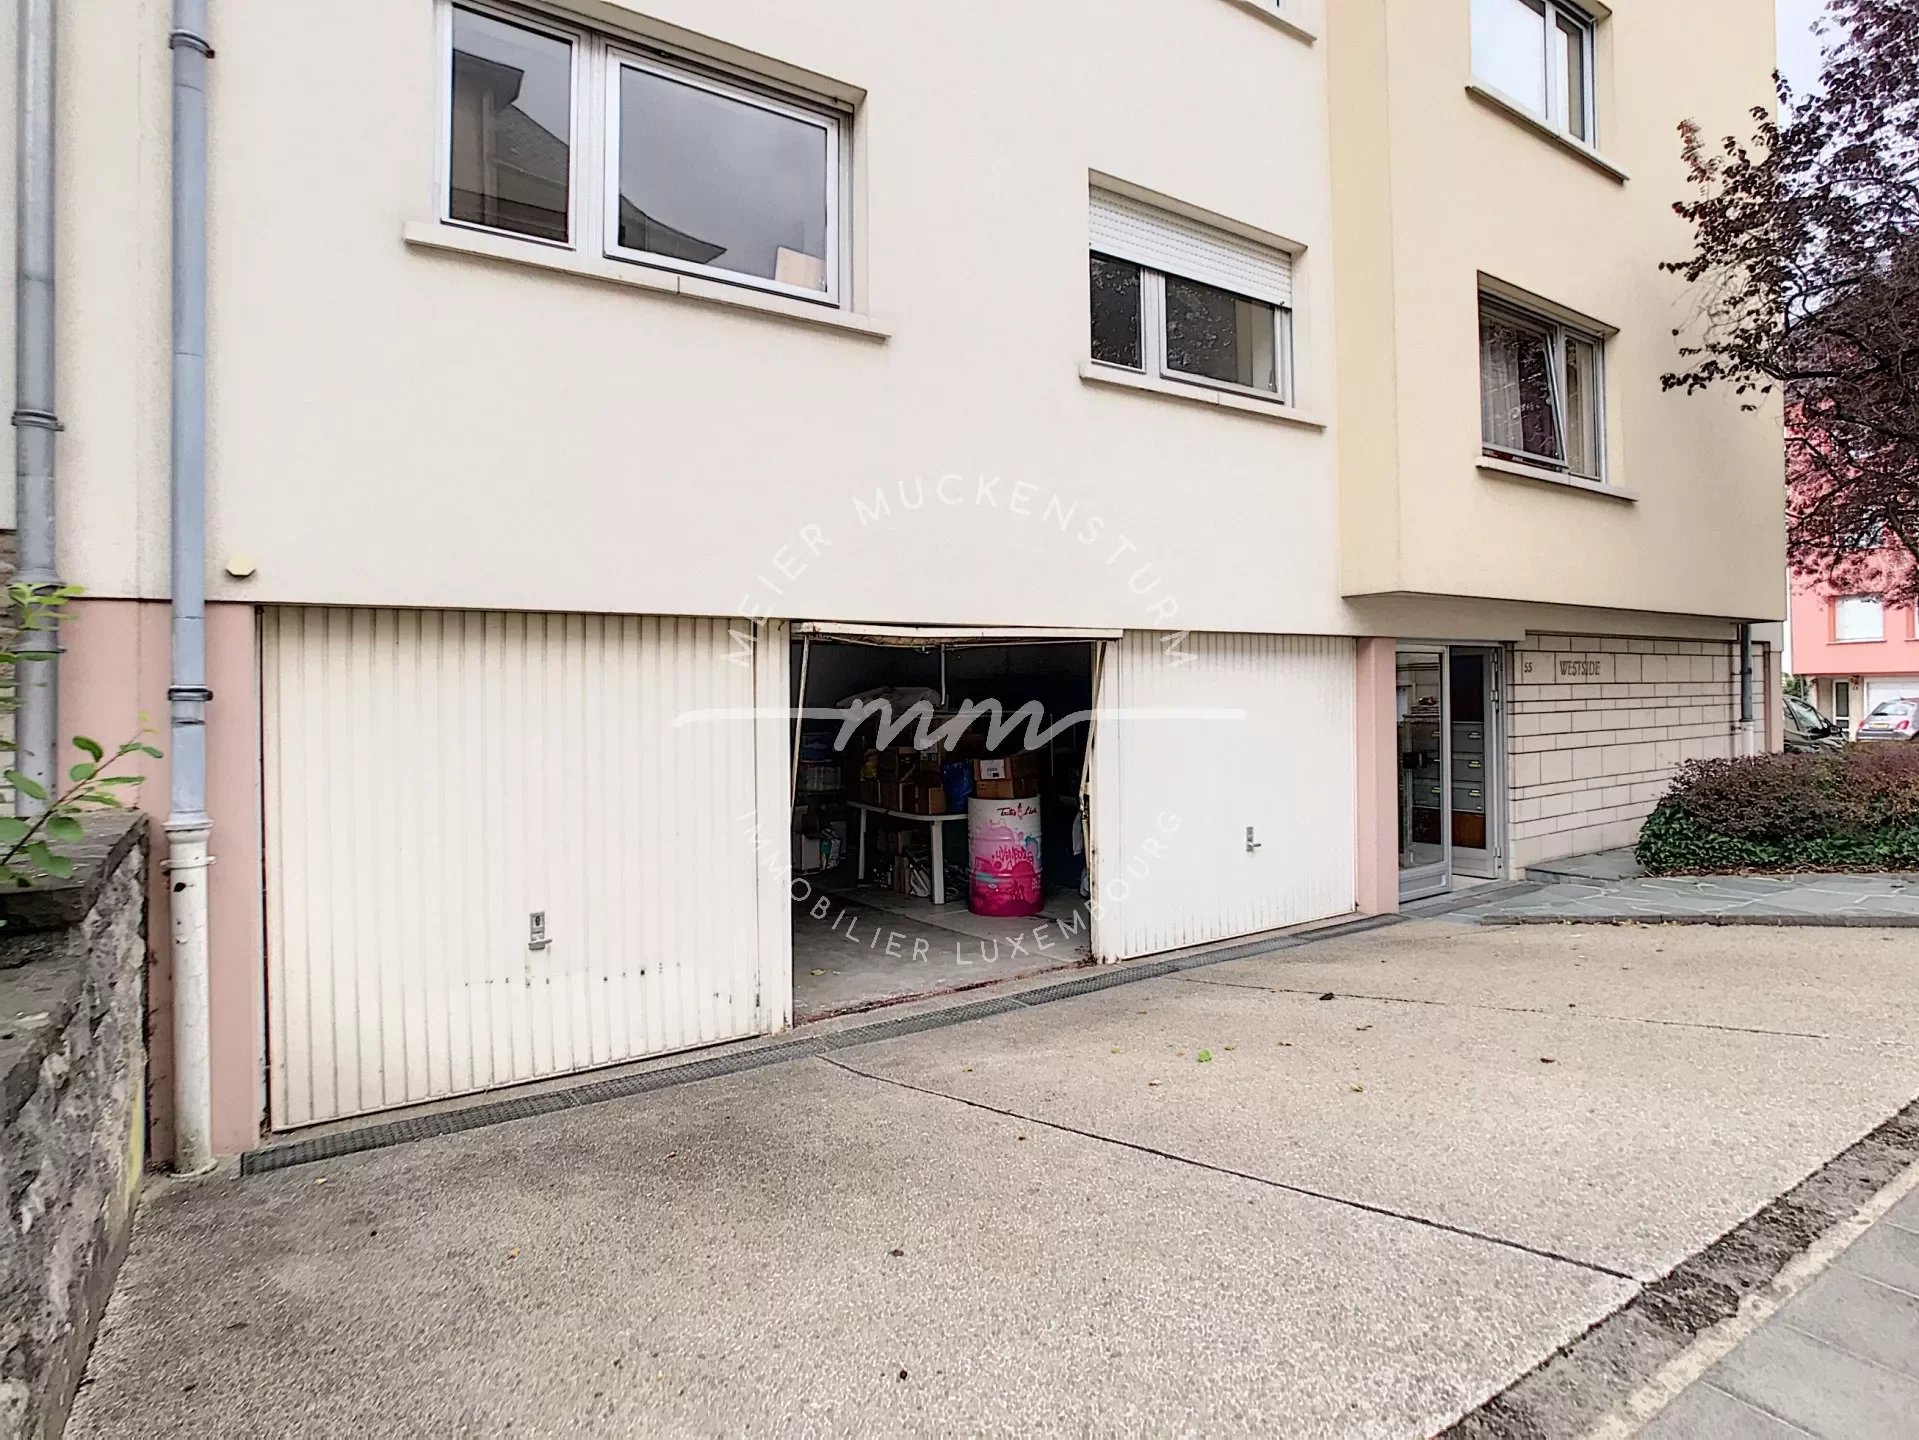 Rental Carpark - Luxembourg Belair - Luxembourg